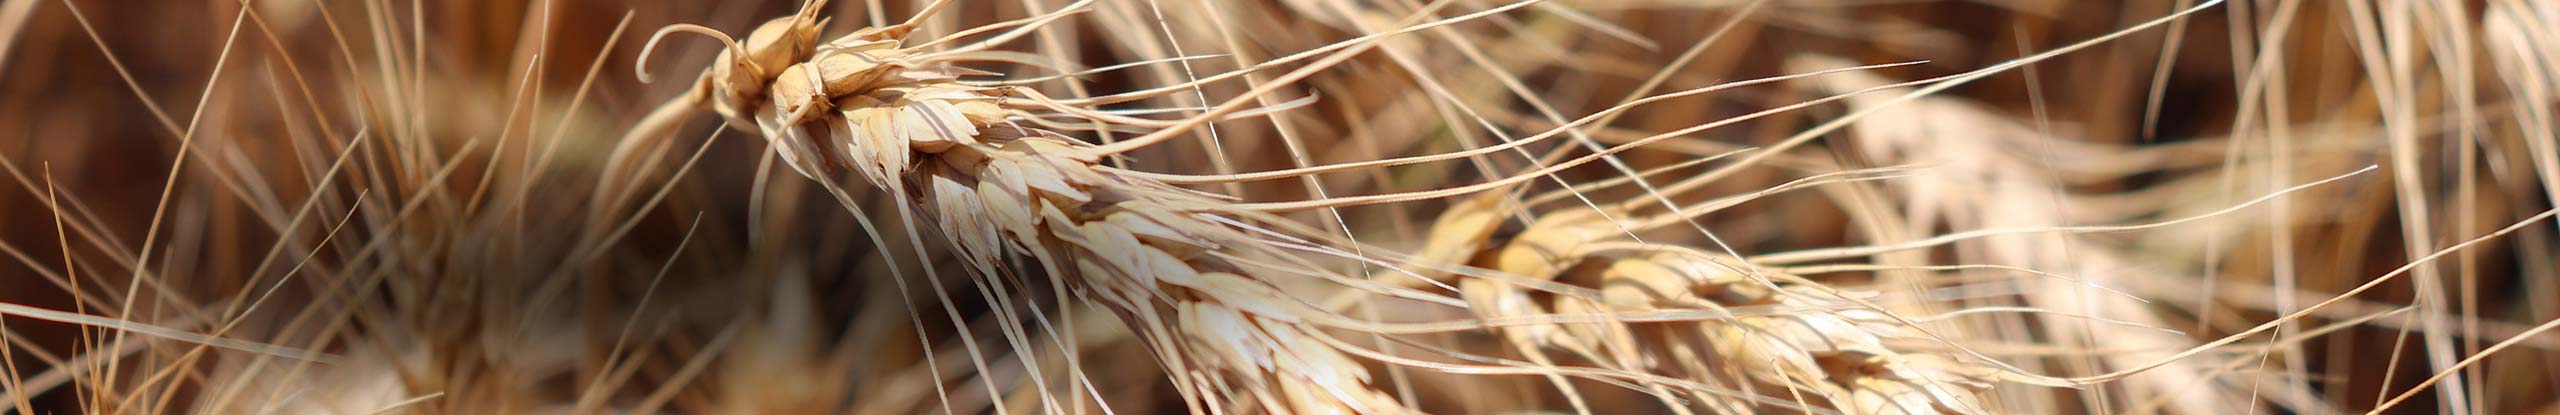 Maximizing durable disease resistance in wheat